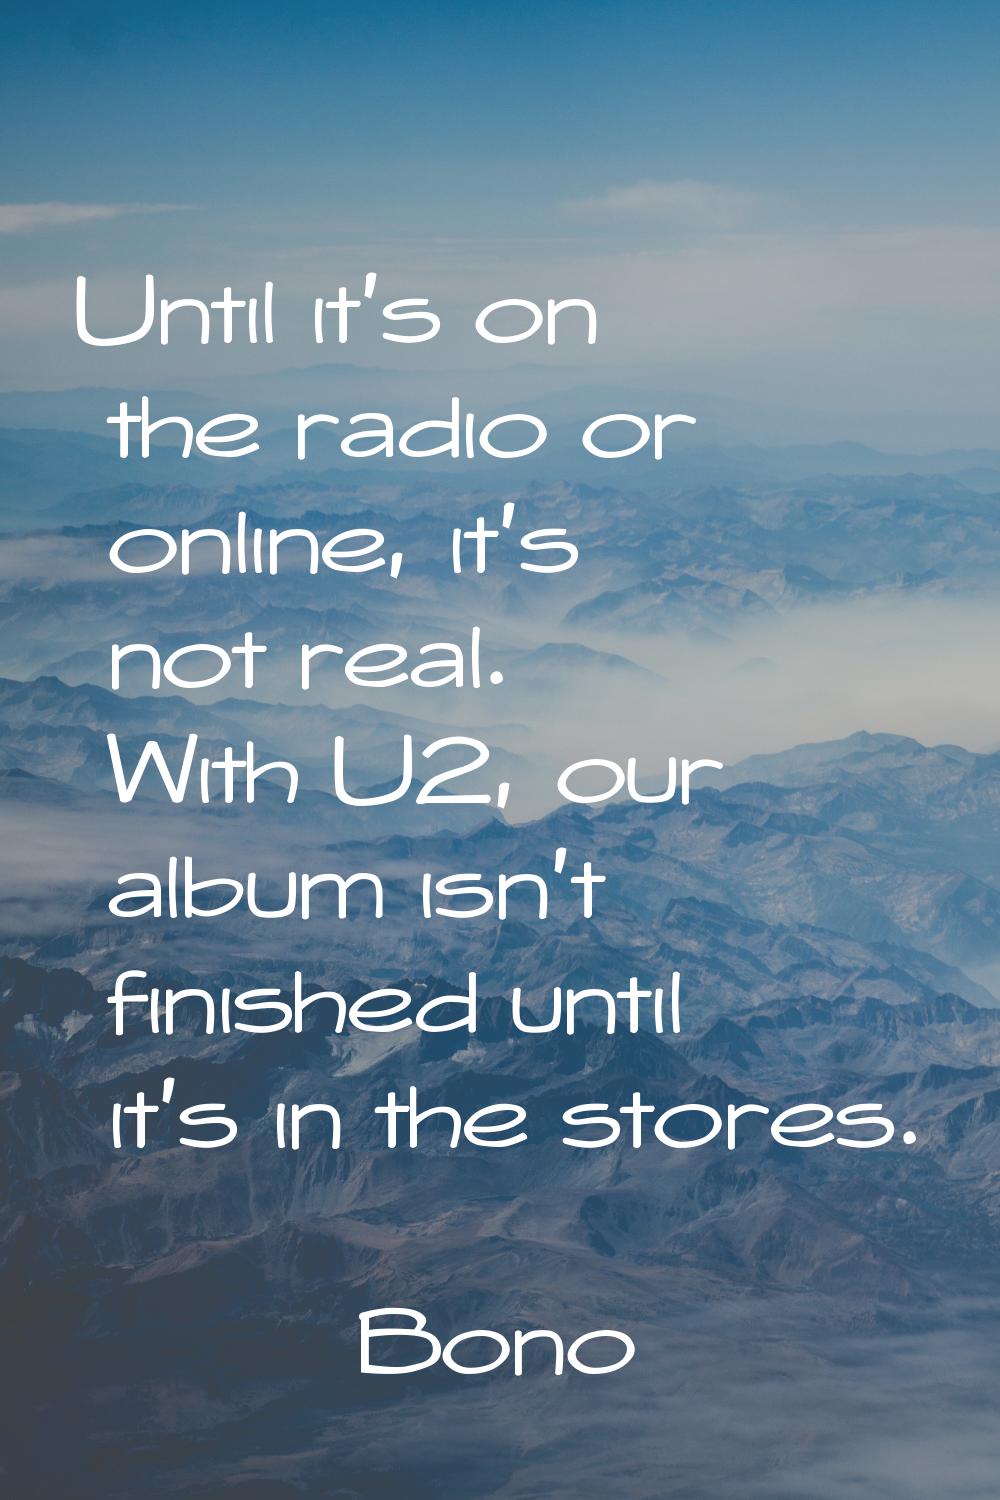 Until it's on the radio or online, it's not real. With U2, our album isn't finished until it's in t